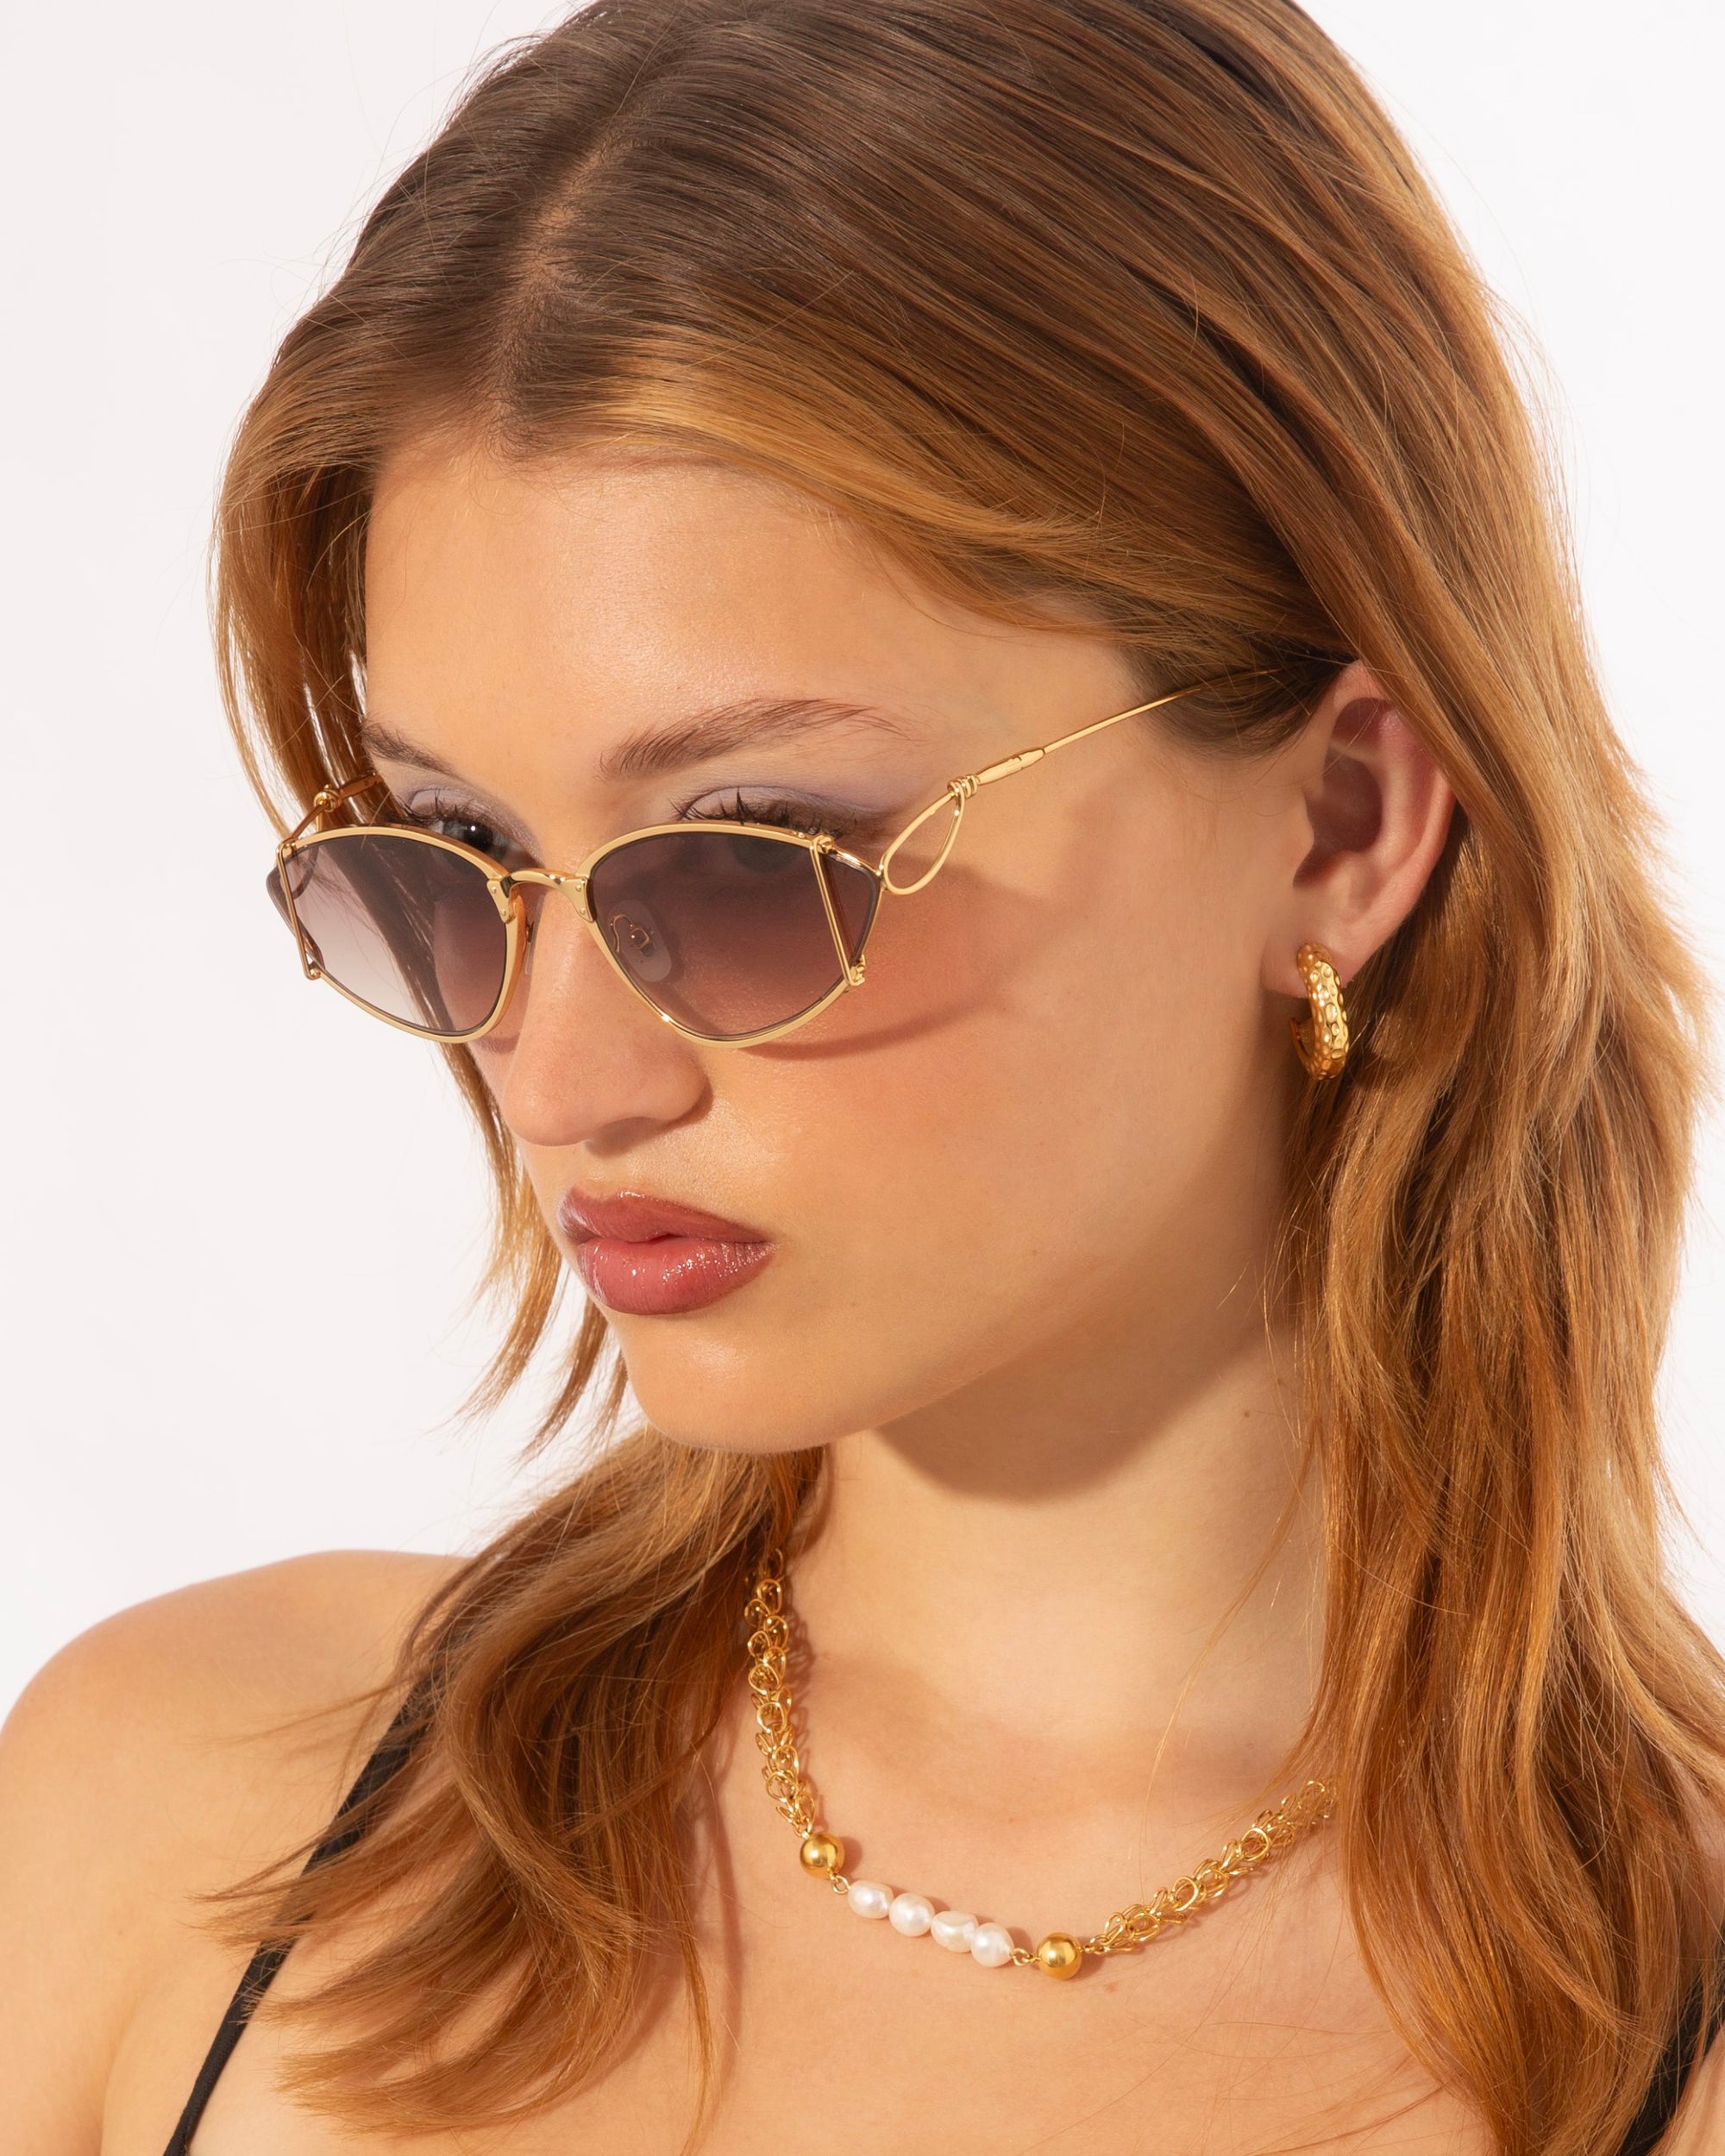 A person with long light brown hair is wearing 18-karat gold-plated, geometric For Art's Sake® Ornate sunglasses and gold jewelry, including a necklace with a mix of gold and white beads and gold hoop earrings. The individual is looking slightly down and to the side against a white background.